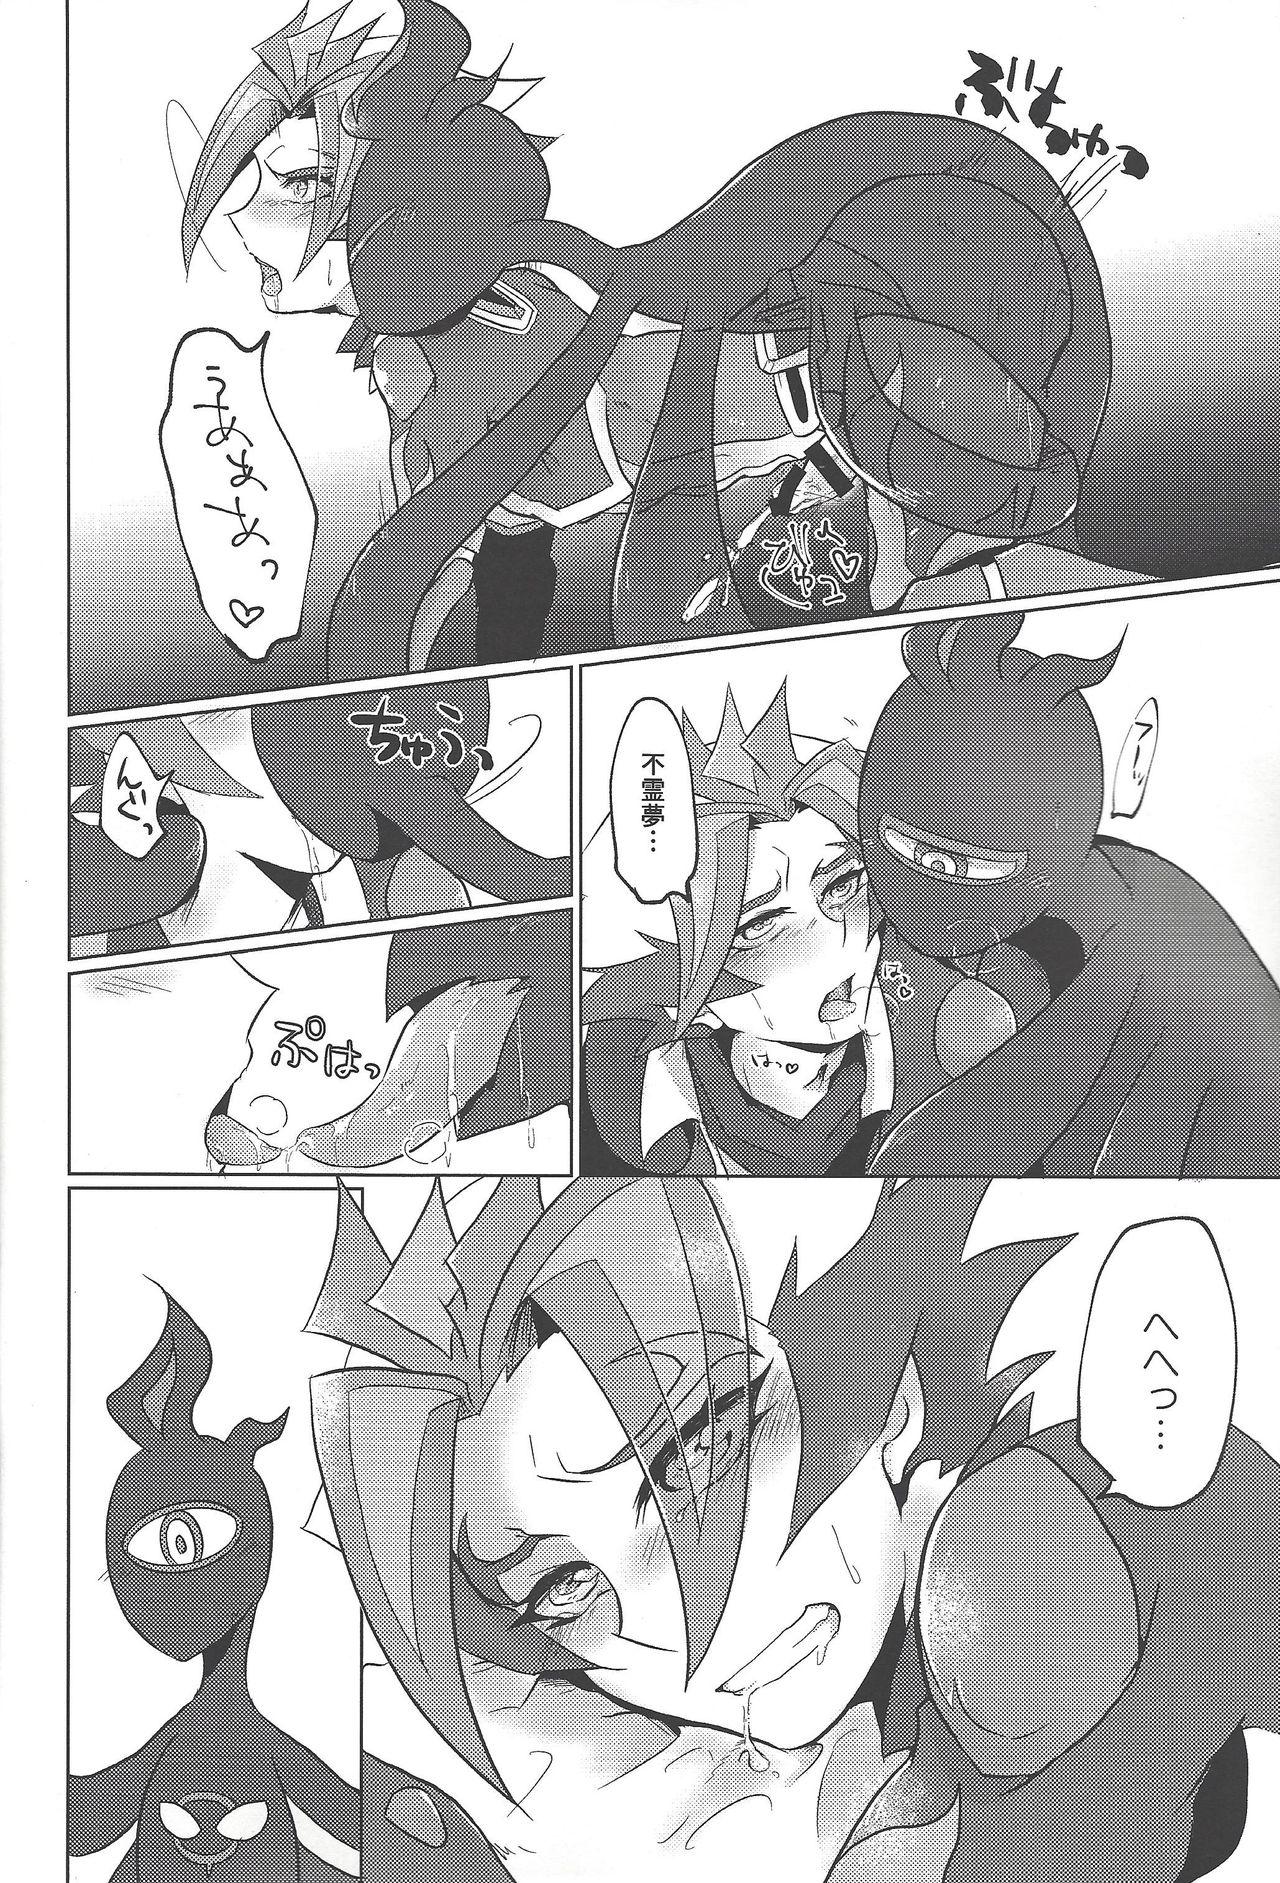 Gloryhole Re:FRAMING - Yu gi oh vrains Indian Sex - Page 3